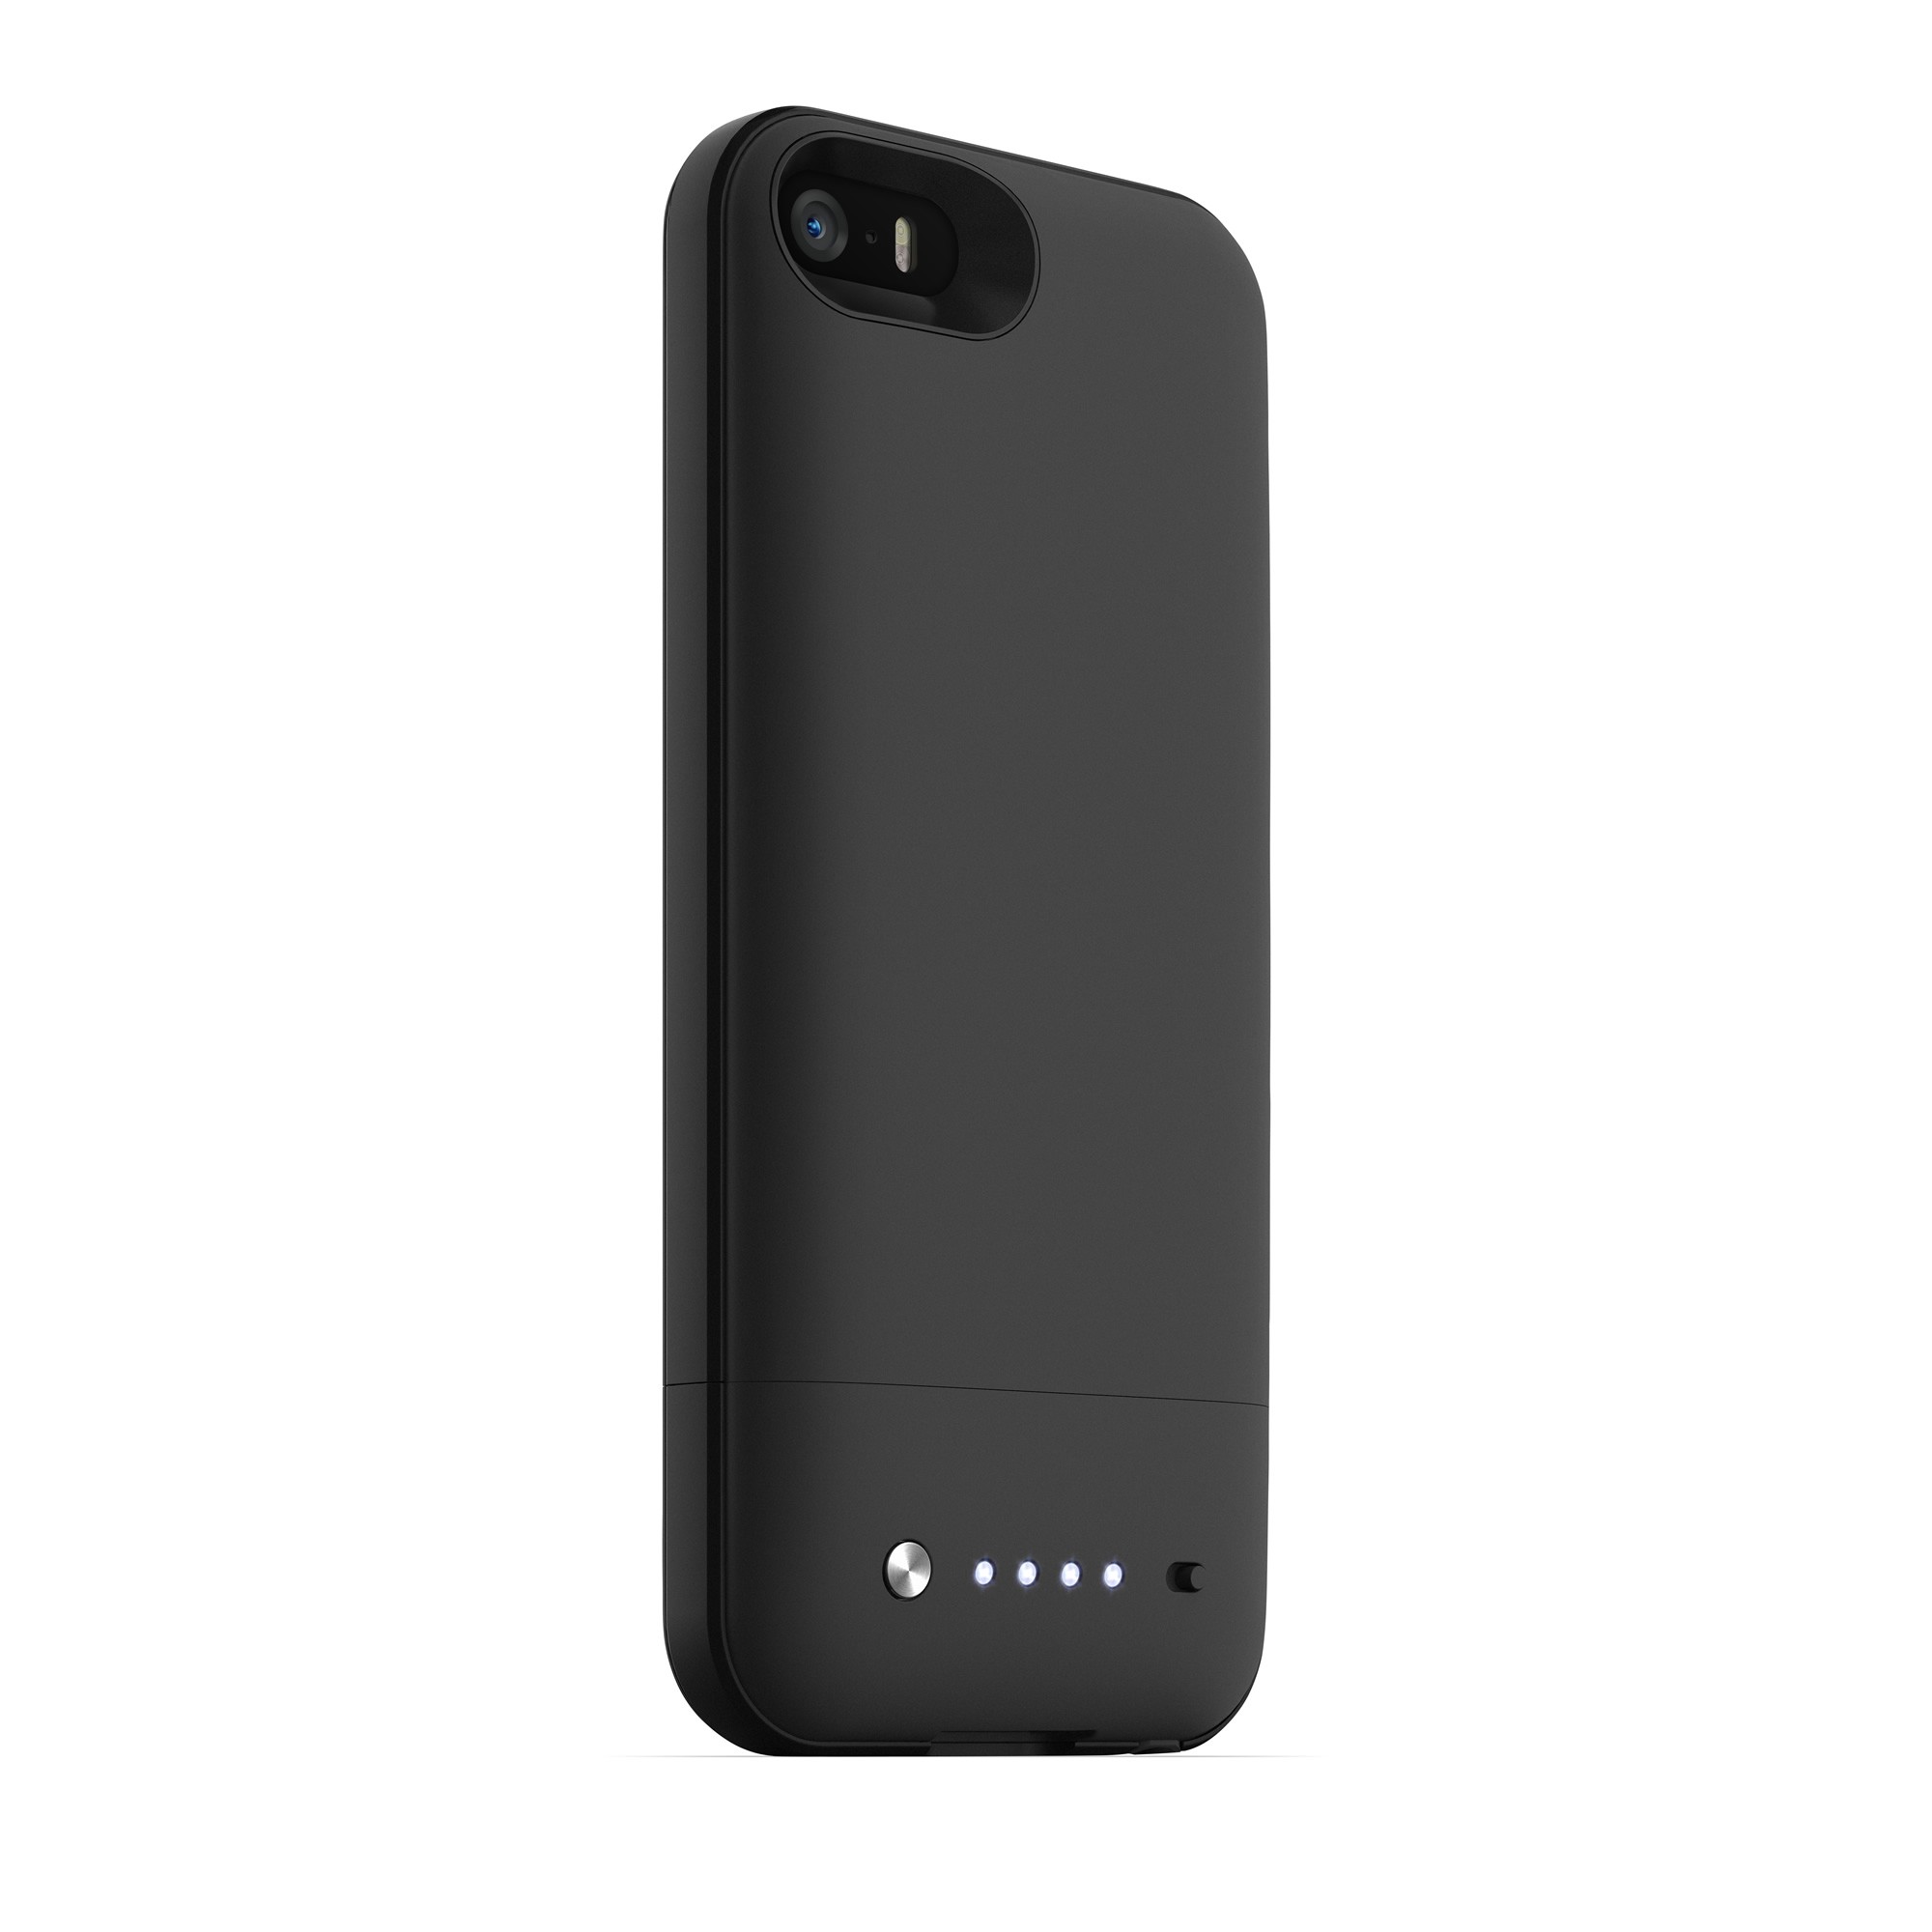 Spacepack-Battery-Case-w-Built-In-32GB-Storage-for-iPhone-5-5s-SE-New